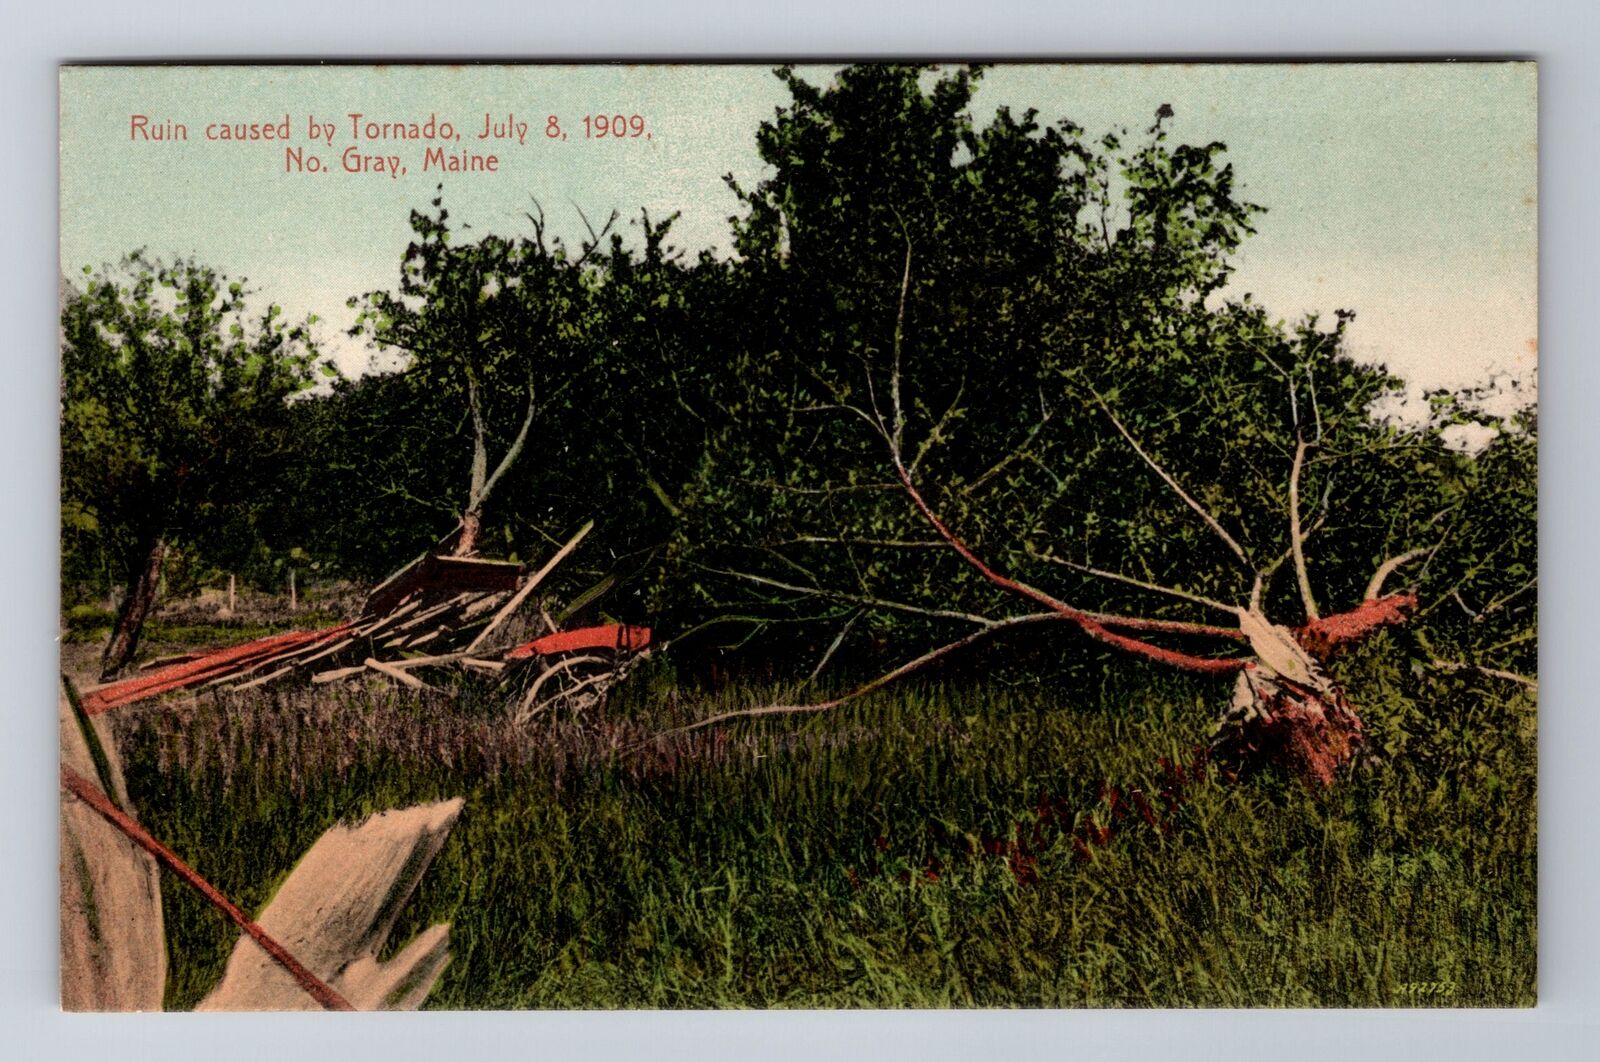 North Gray ME-Maine, Ruins From July 8,1909 Tornado, Antique Vintage Postcard